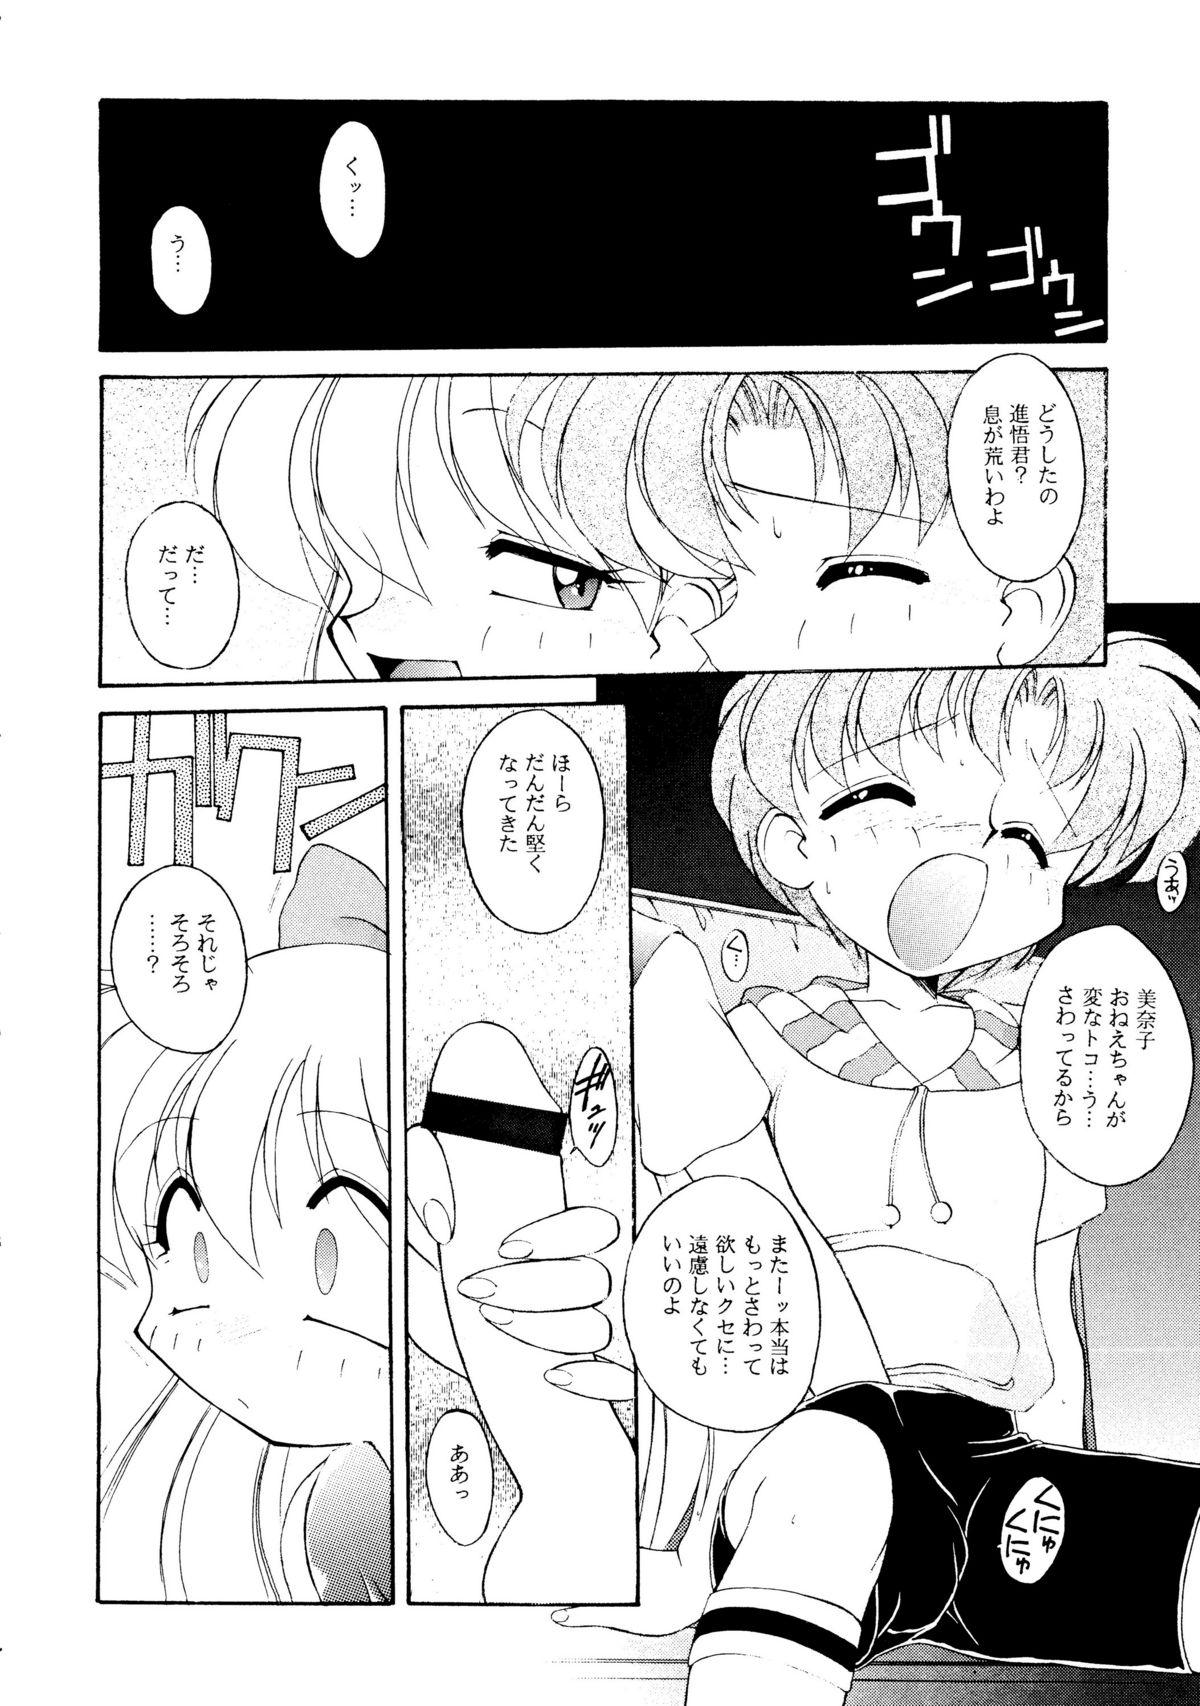 Perverted HABER 8 SILVER MOON - Sailor moon Vecina - Page 7